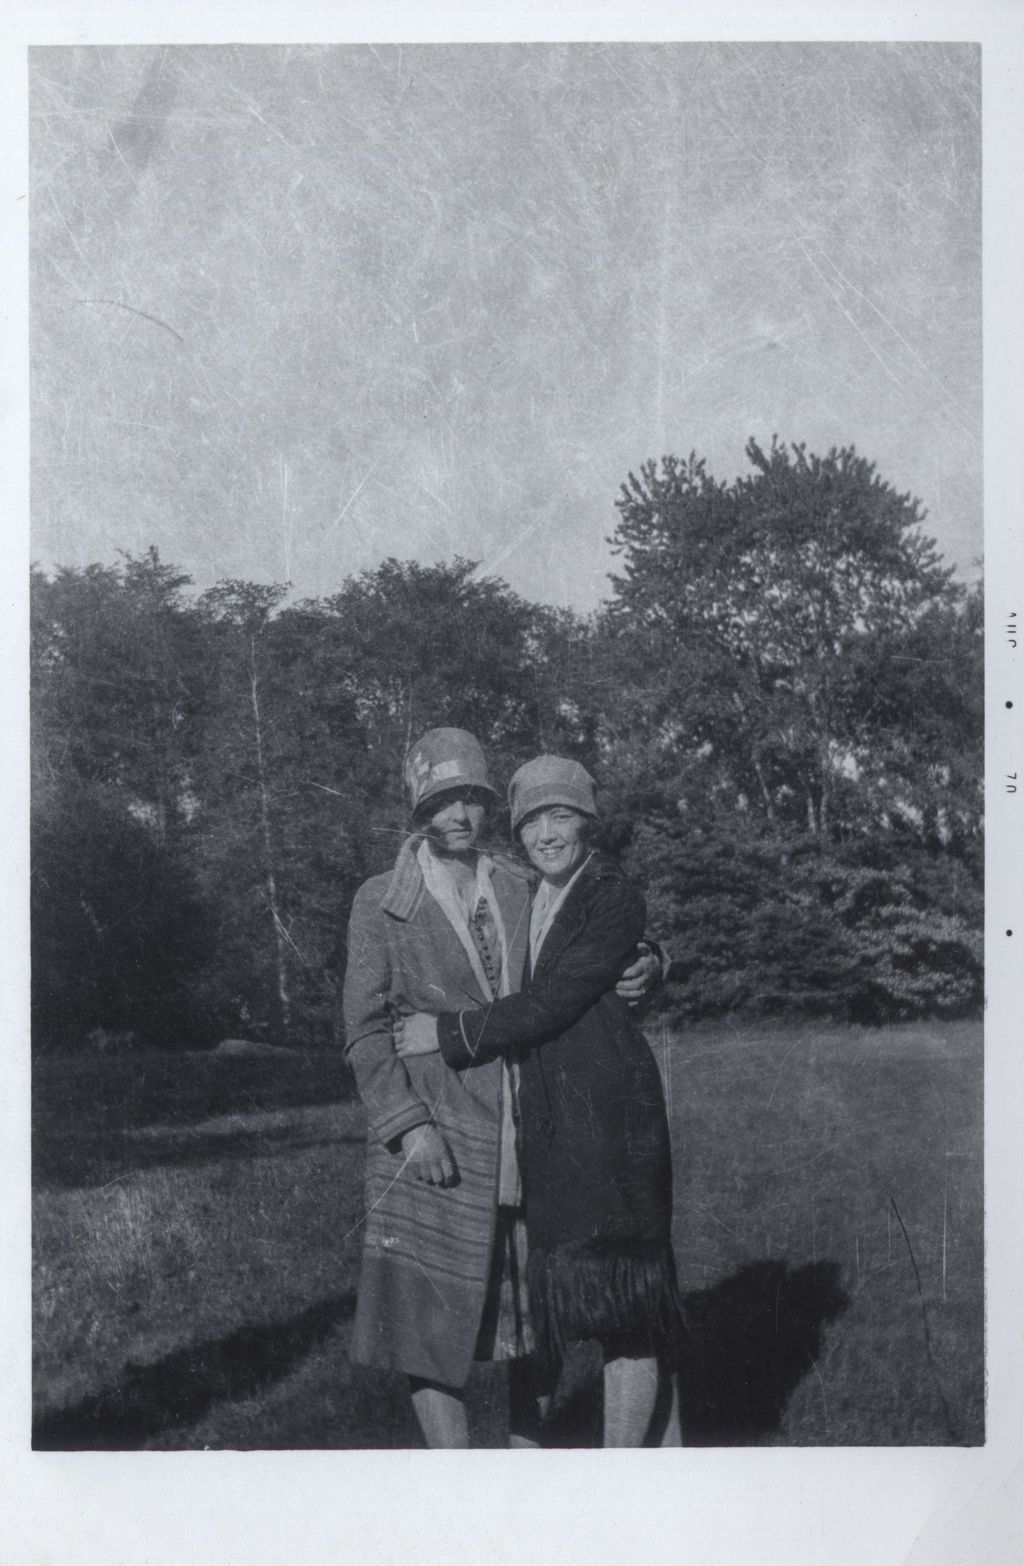 Miniature of Eleanor Guilfoyle (Daley) and Laverne O'Brien